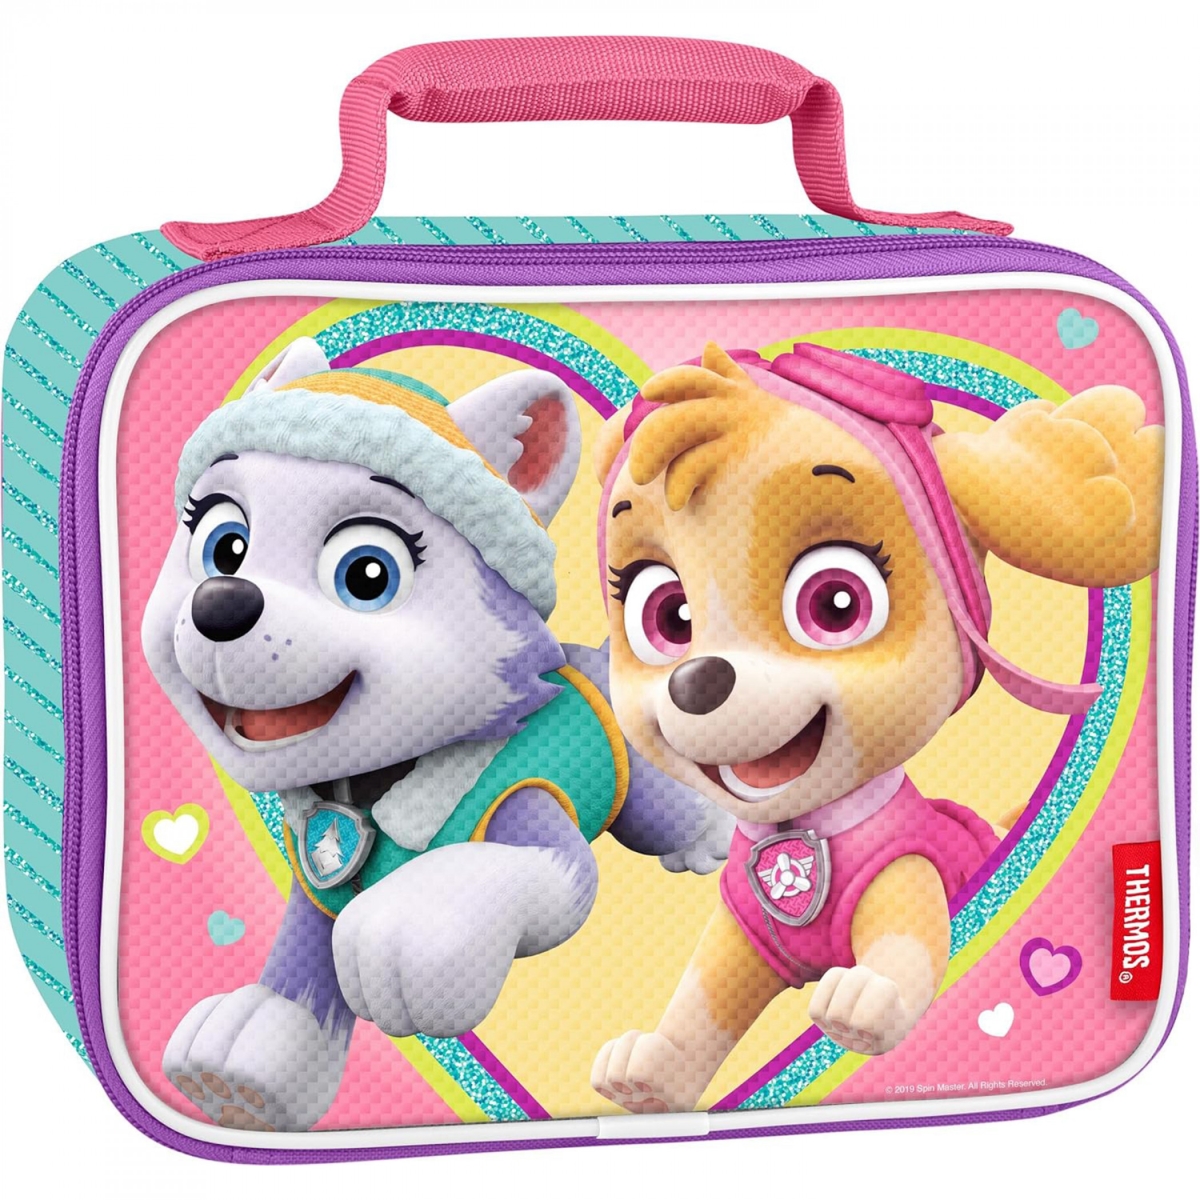 Picture of Paw Patrol 877735 Paw Patrol Girls Thermos Insulated Lunch Box